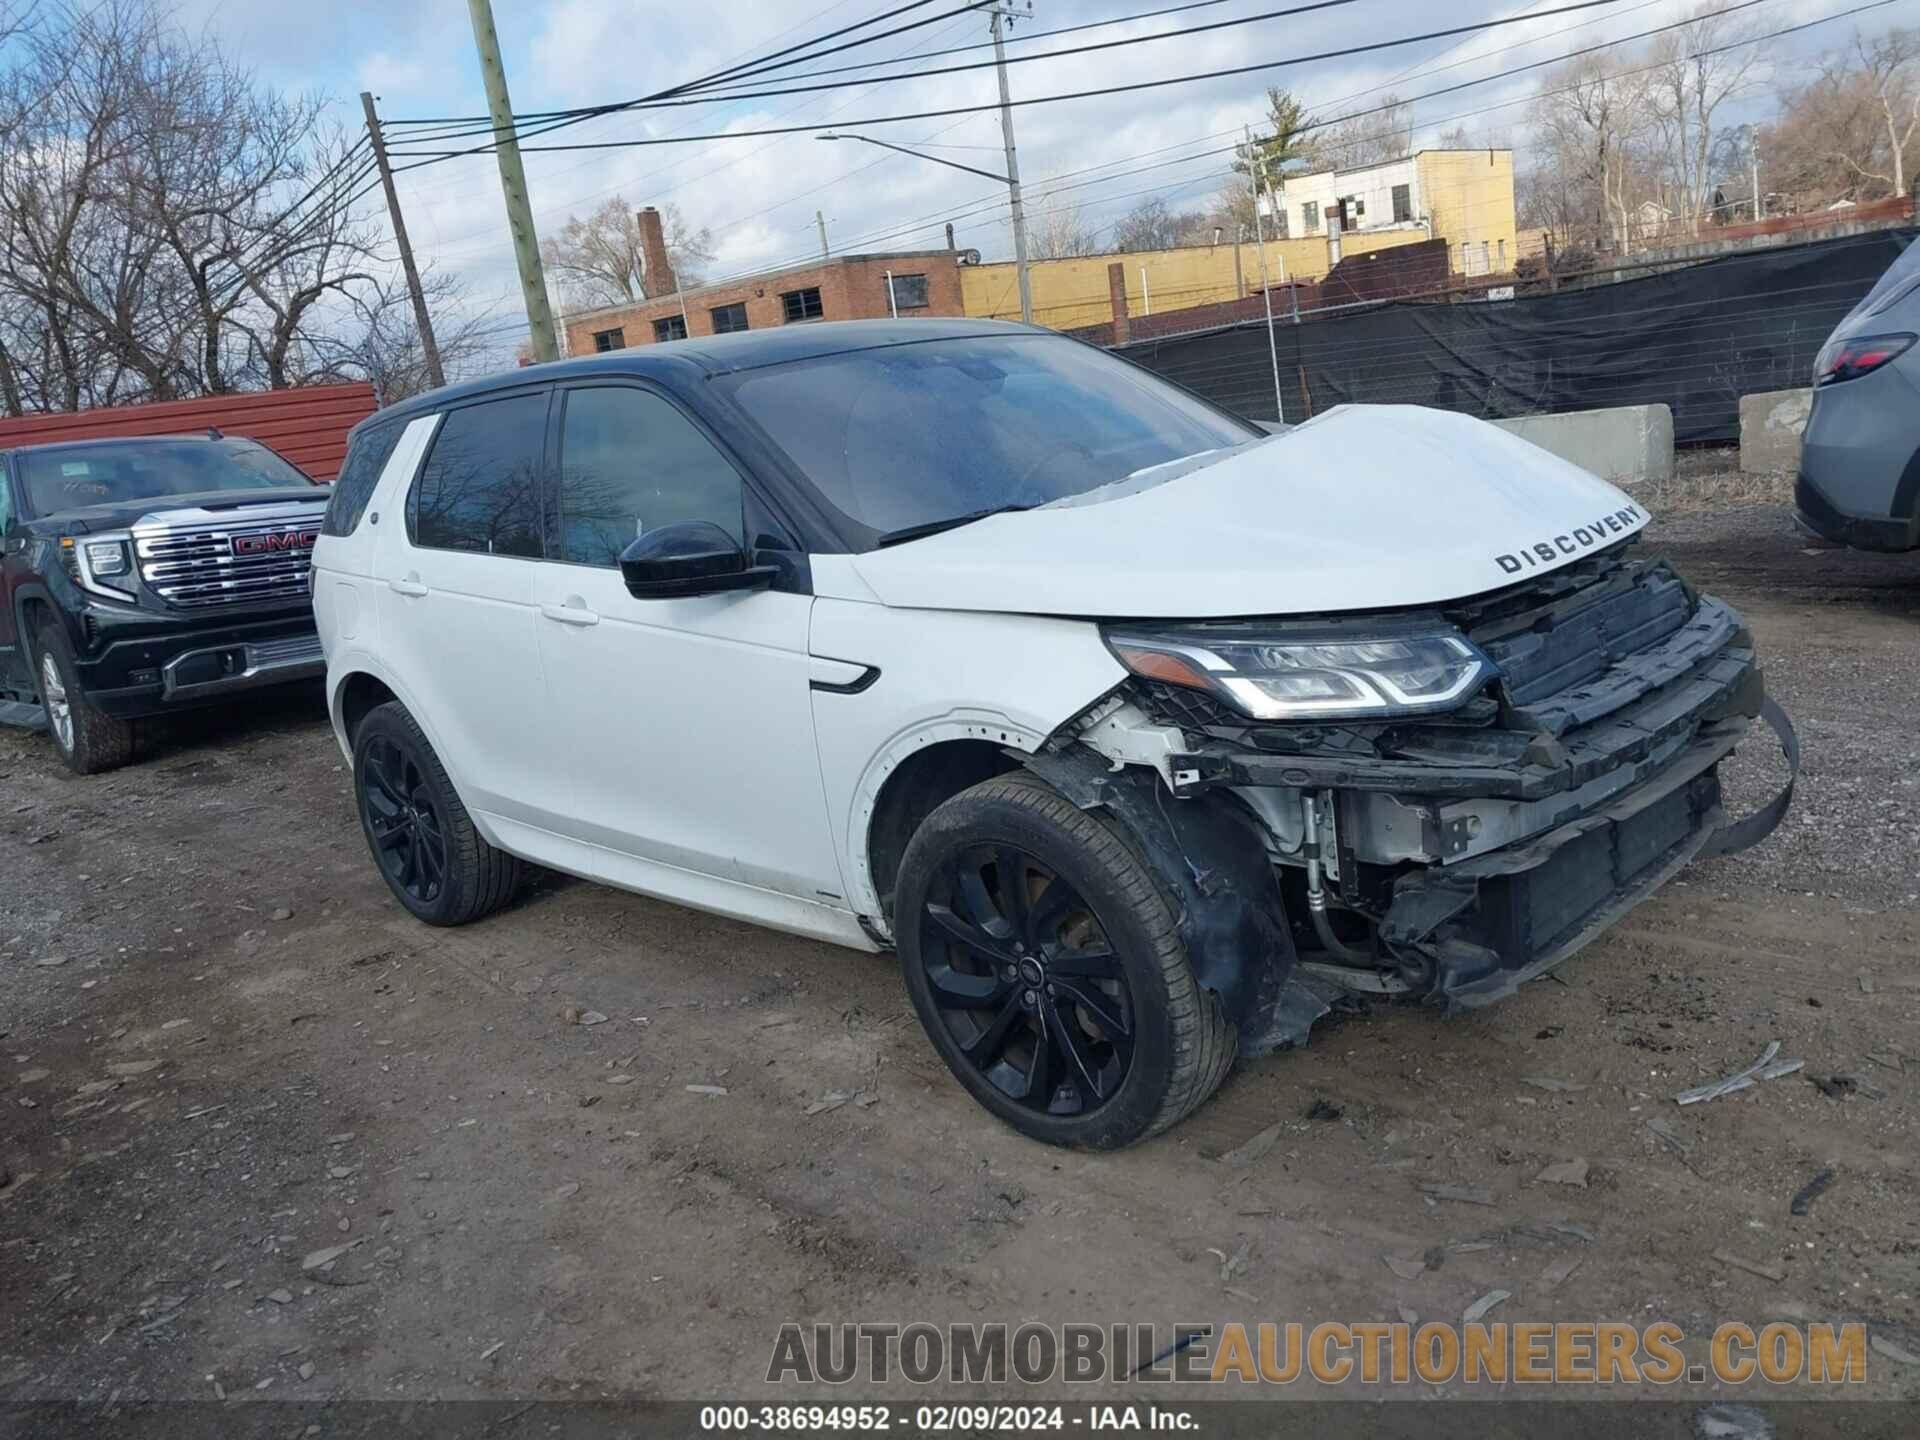 SALCT2FX1LH839030 LAND ROVER DISCOVERY SPORT 2020